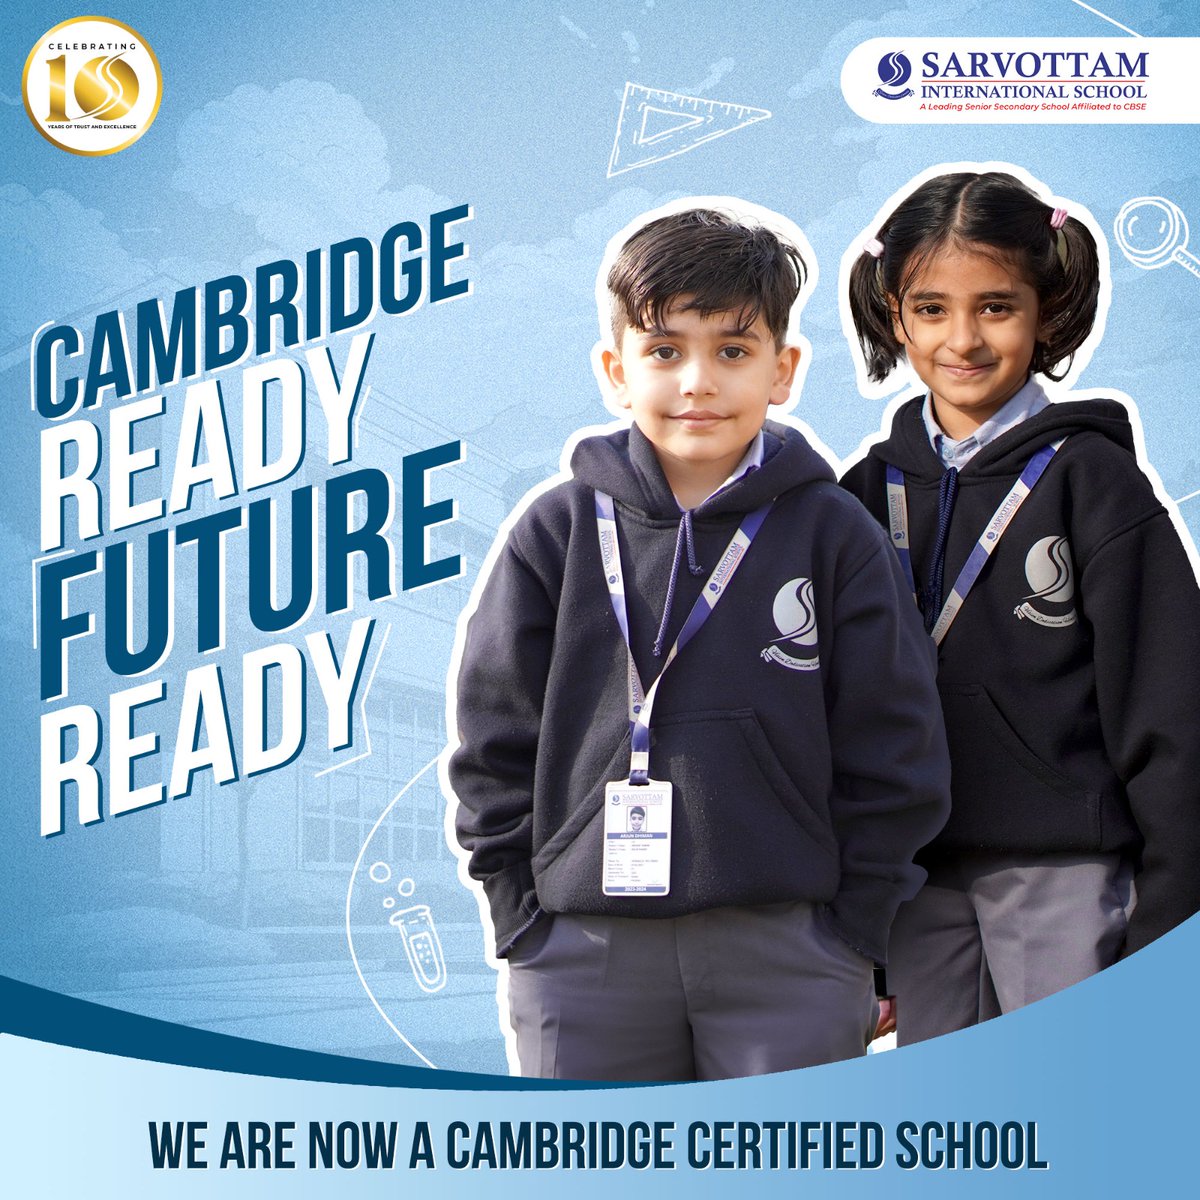 Sarvottam International School is now a proud member of the Cambridge family. Join us in shaping the next generation of world-changers! 📚

#SarvottamInternationalSchool #CambridgeCertified  #GlobalEducation #InternationalCurriculum #FutureLeaders #NextGenEducation